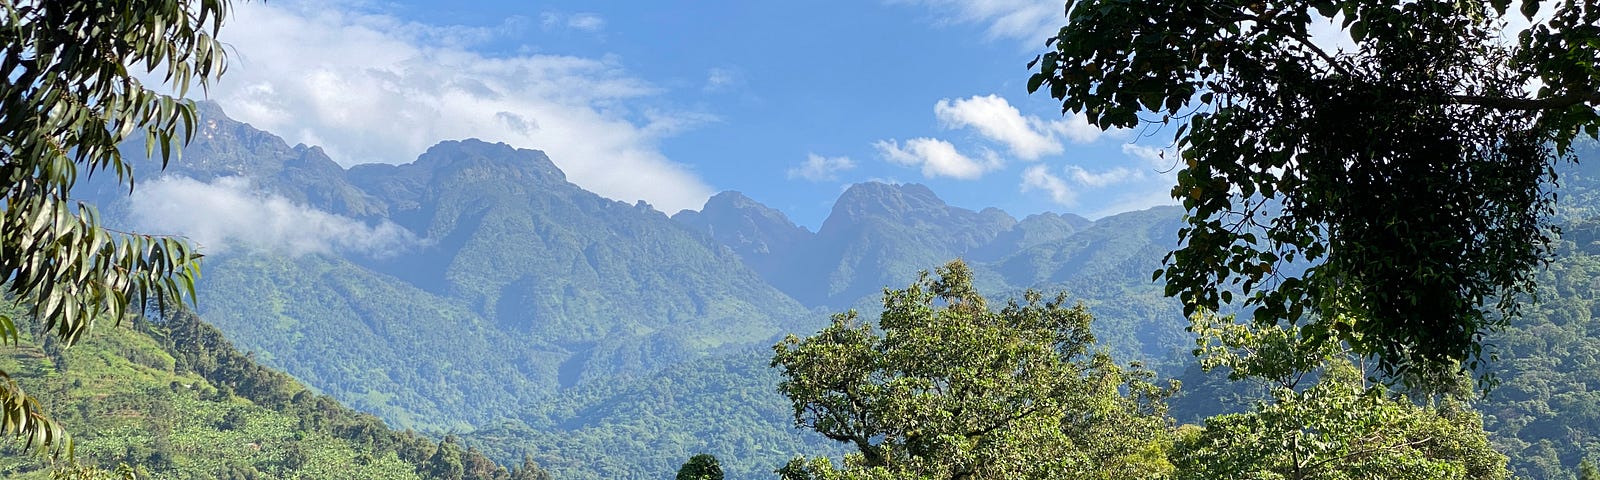 A stunning blue sky with mountains and a jungle valley below it.